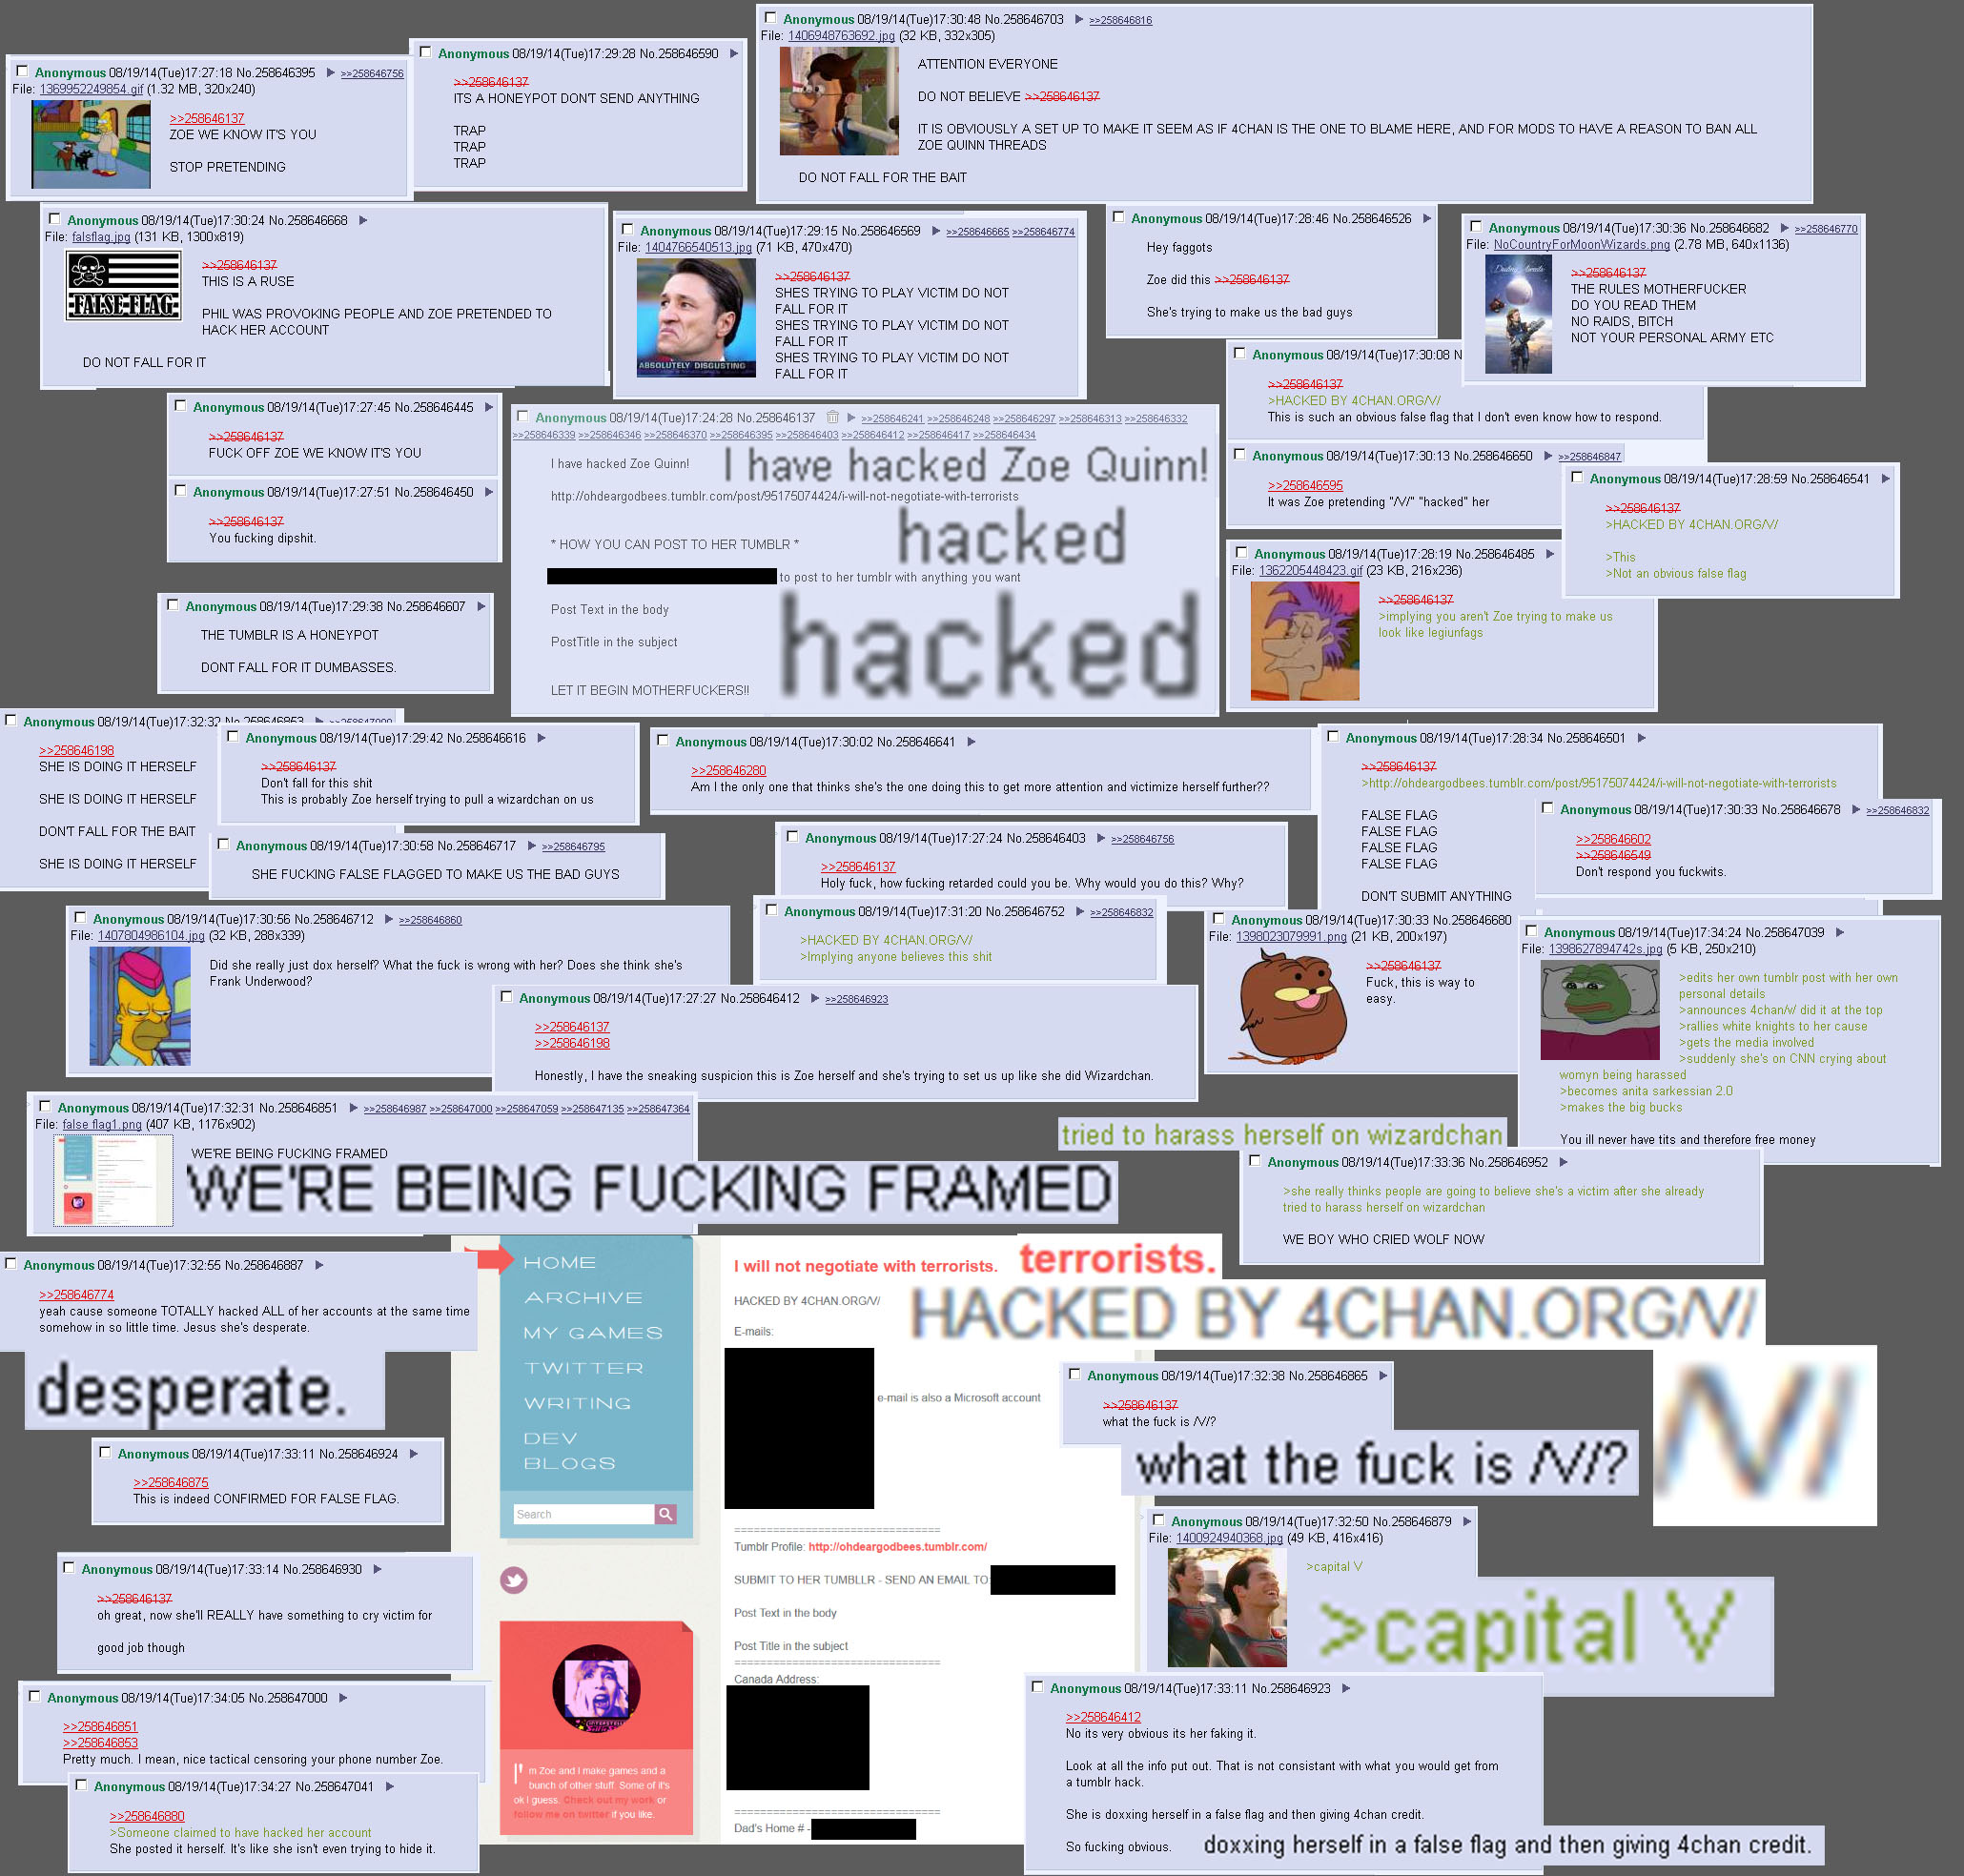 4chan reacts to Quinn's doxxing